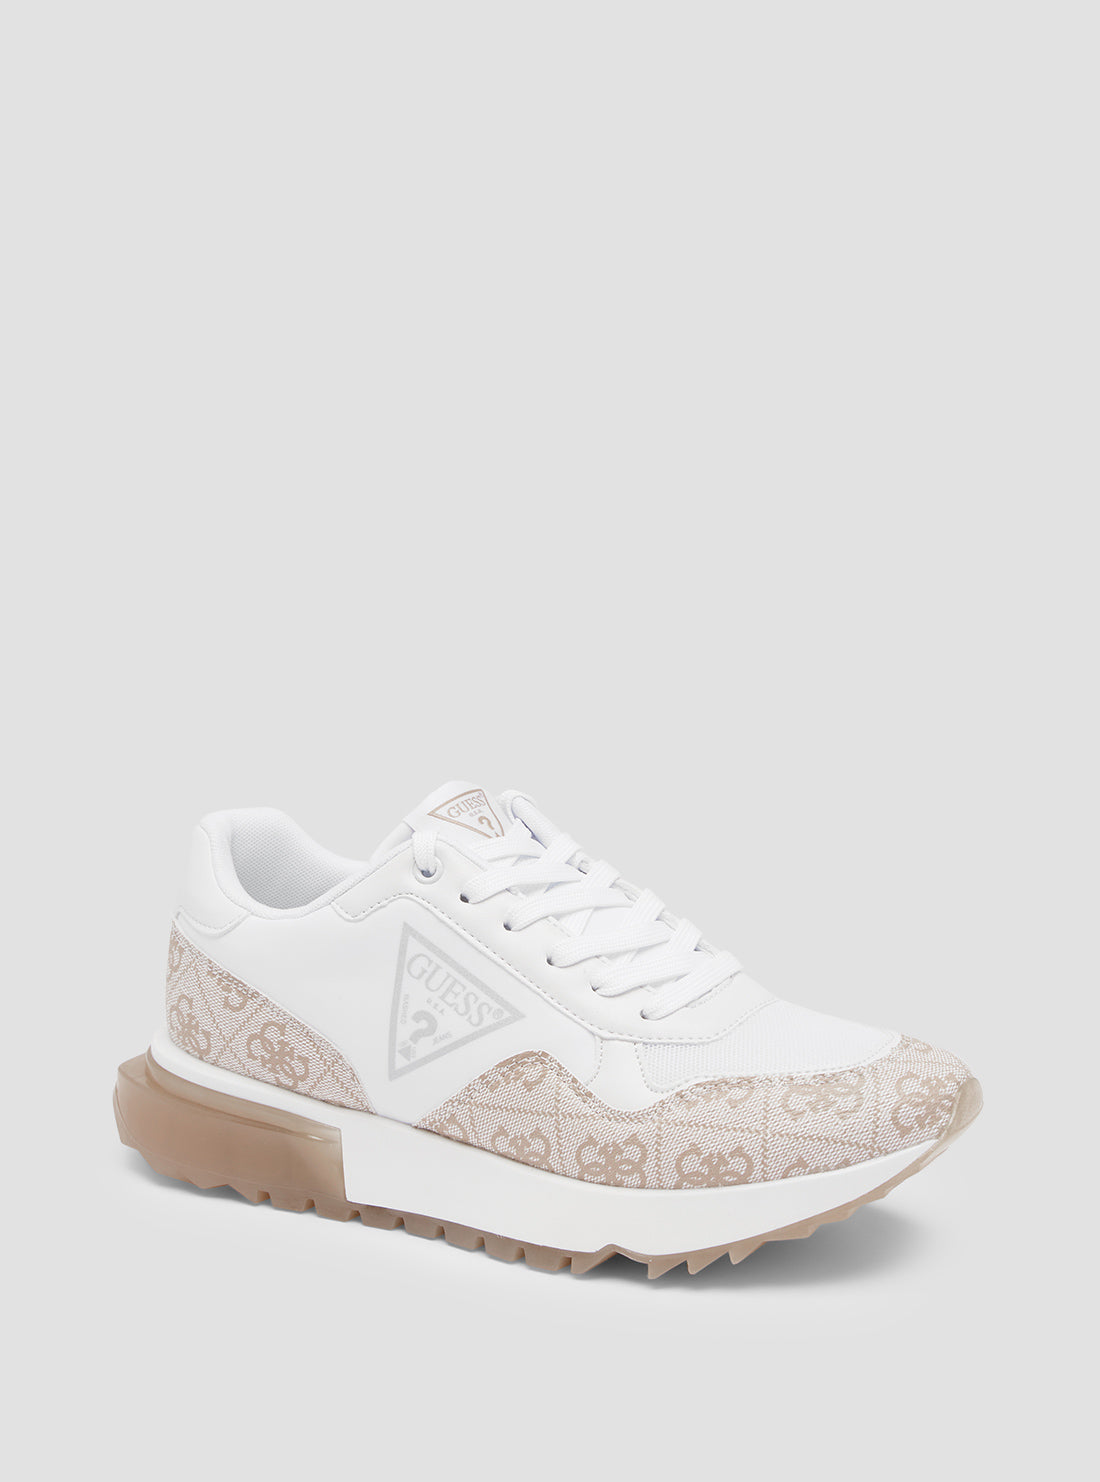 White and Taupe Melany Logo Sneakers | GUESS Women's Shoes | front view